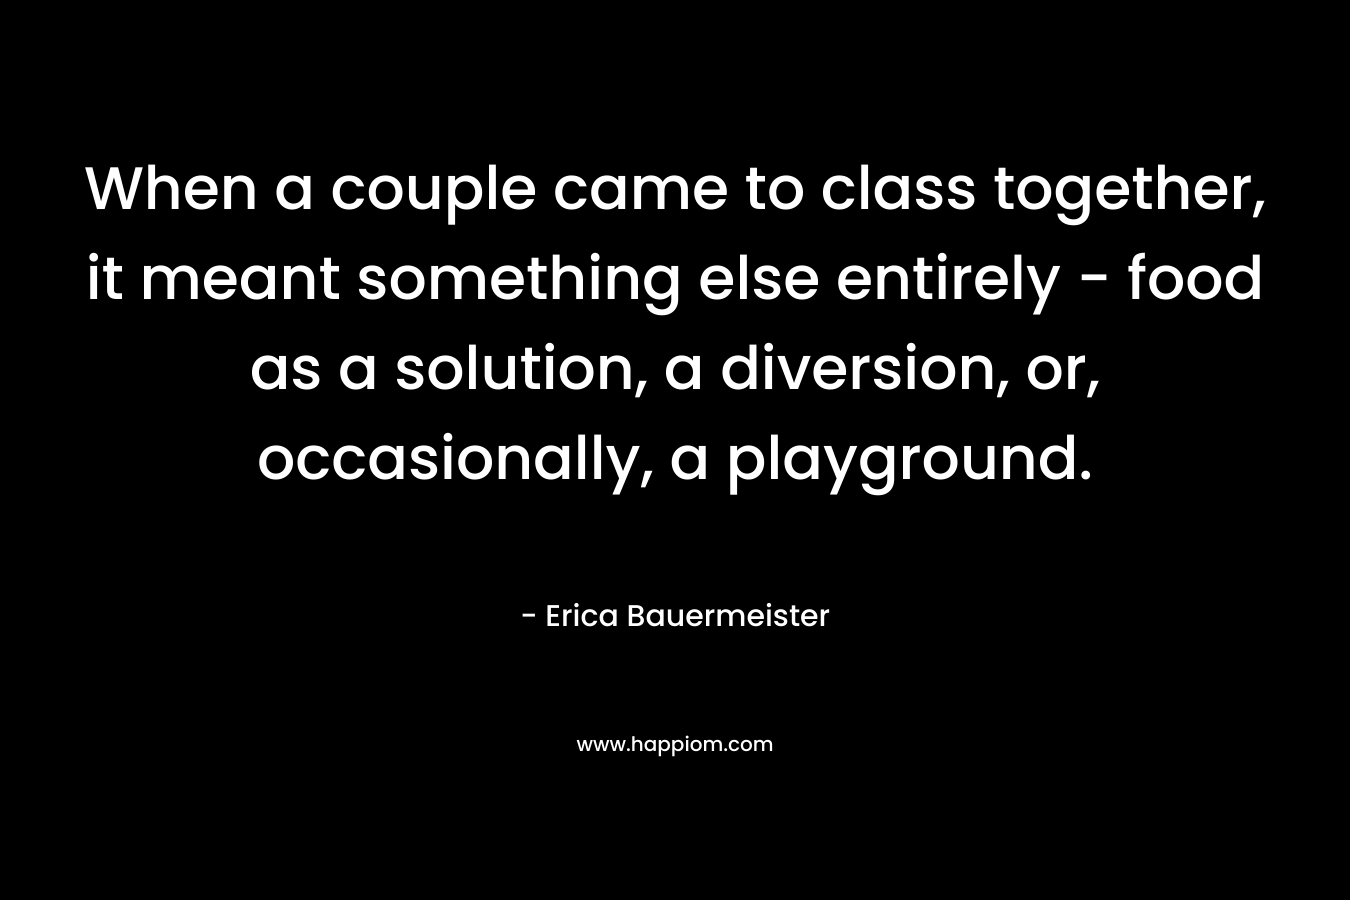 When a couple came to class together, it meant something else entirely – food as a solution, a diversion, or, occasionally, a playground. – Erica Bauermeister